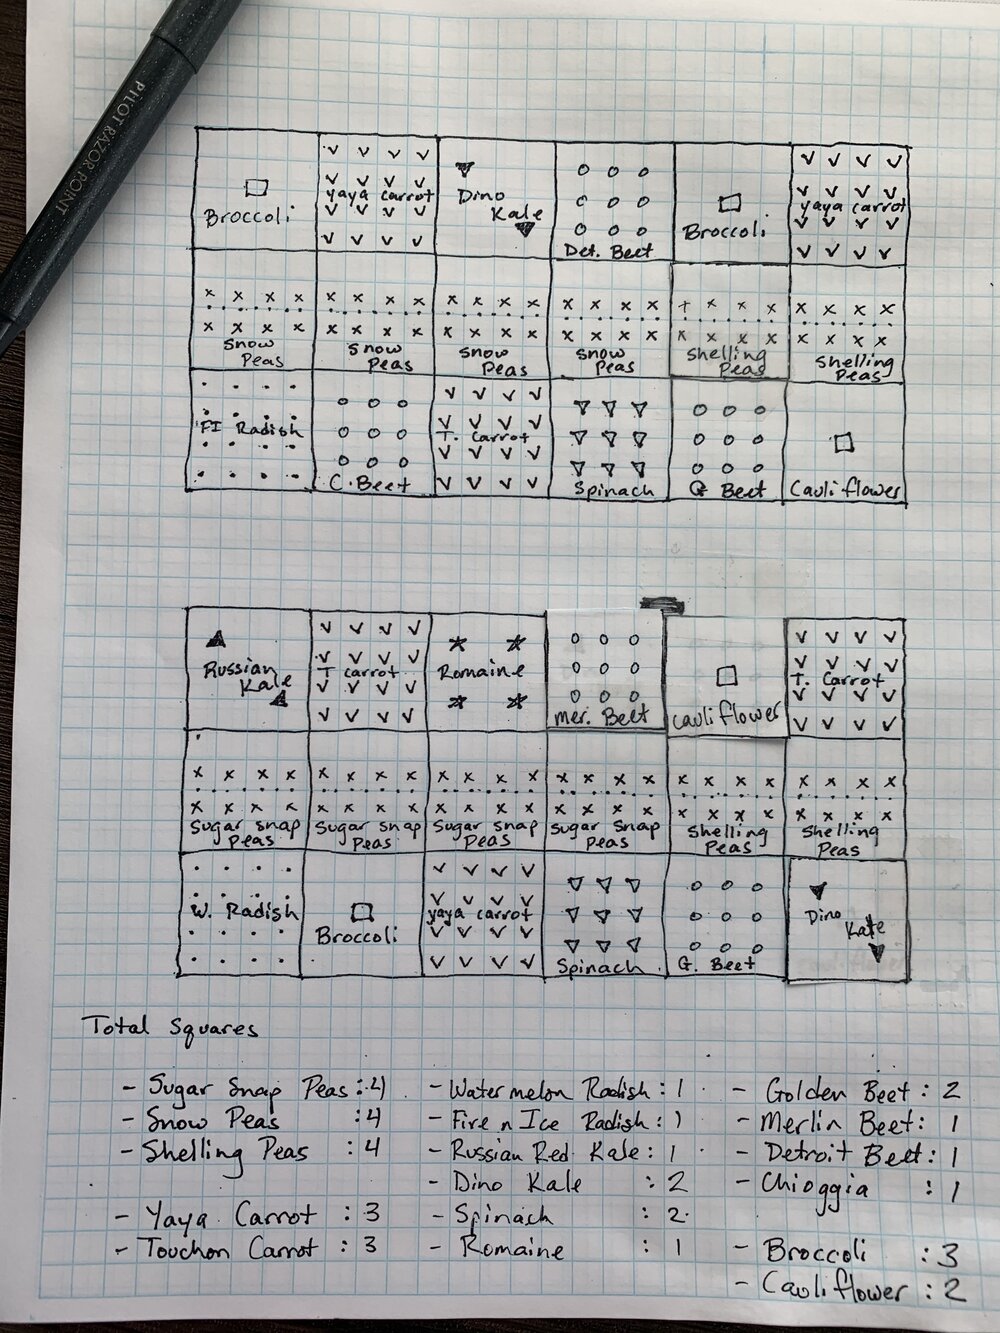 My raised bed plans for my square foot style gardens.